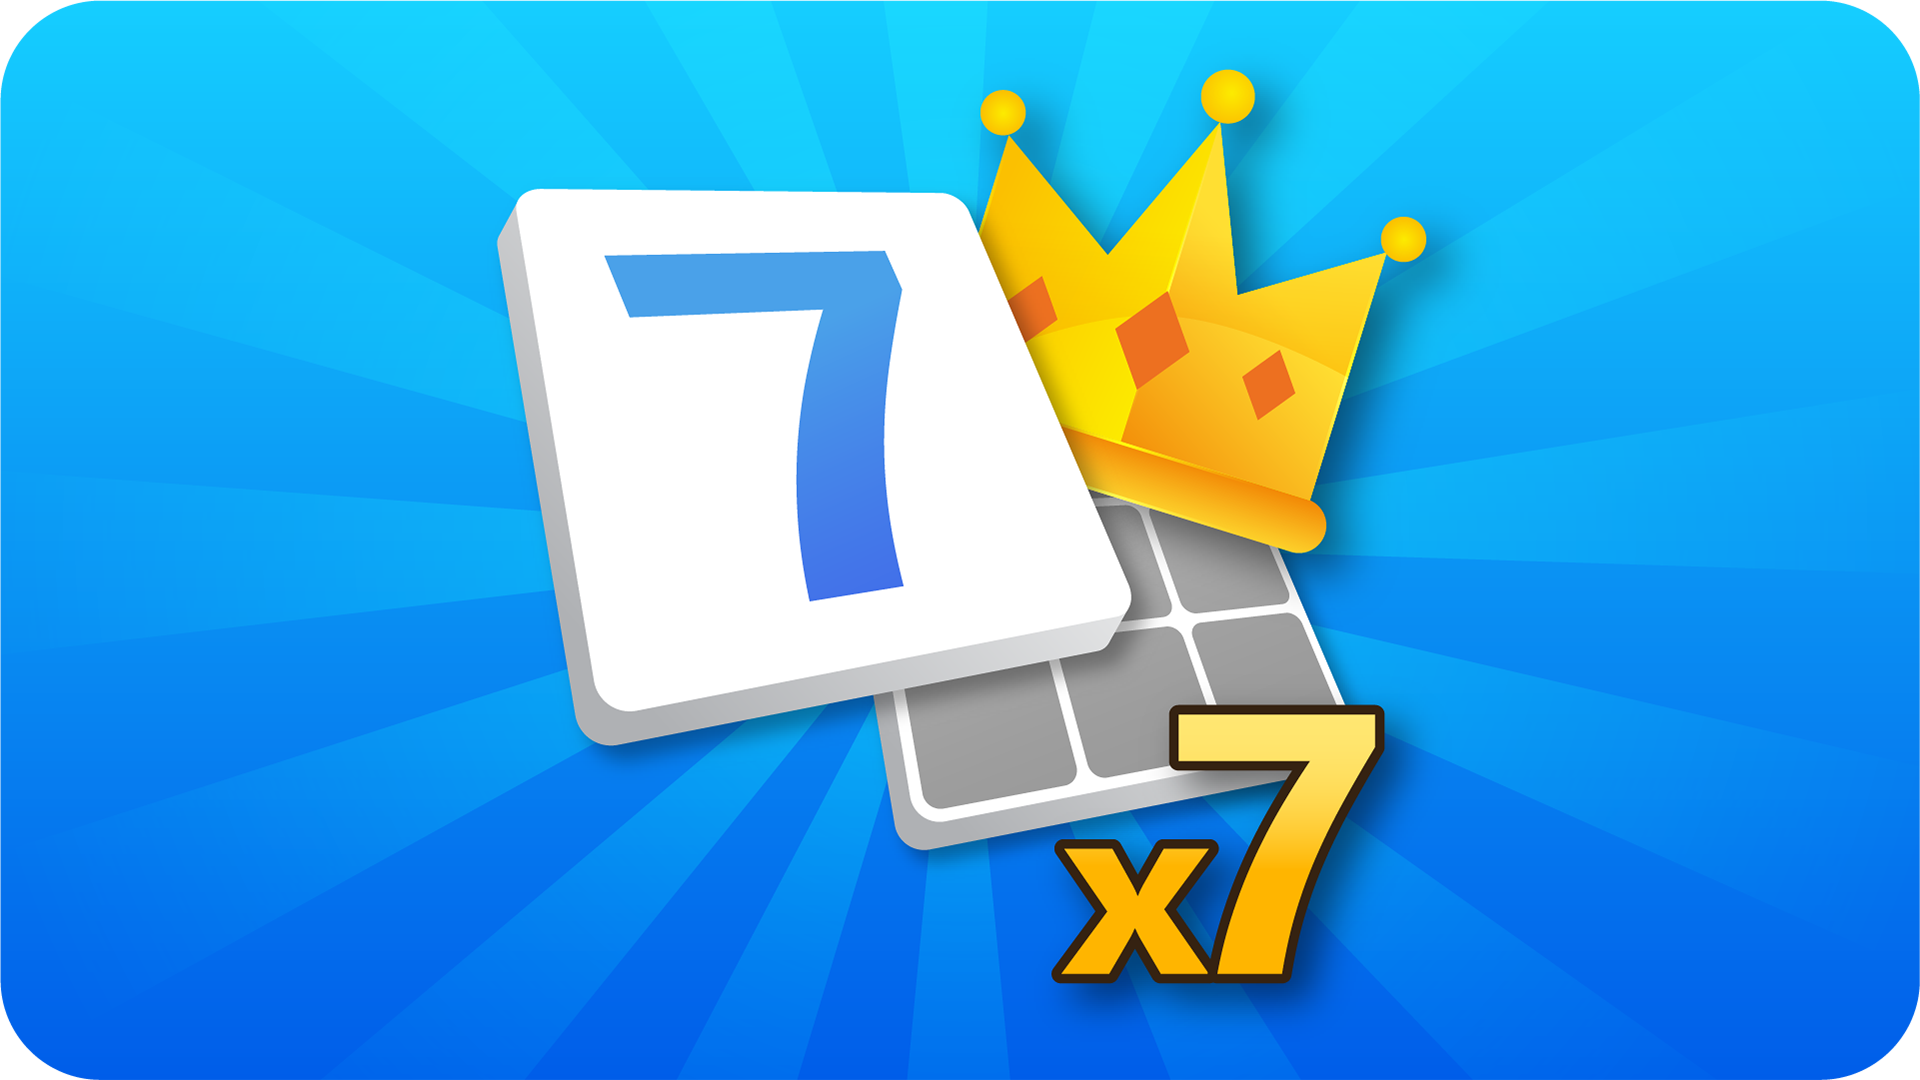 Icon for Lucky 7's